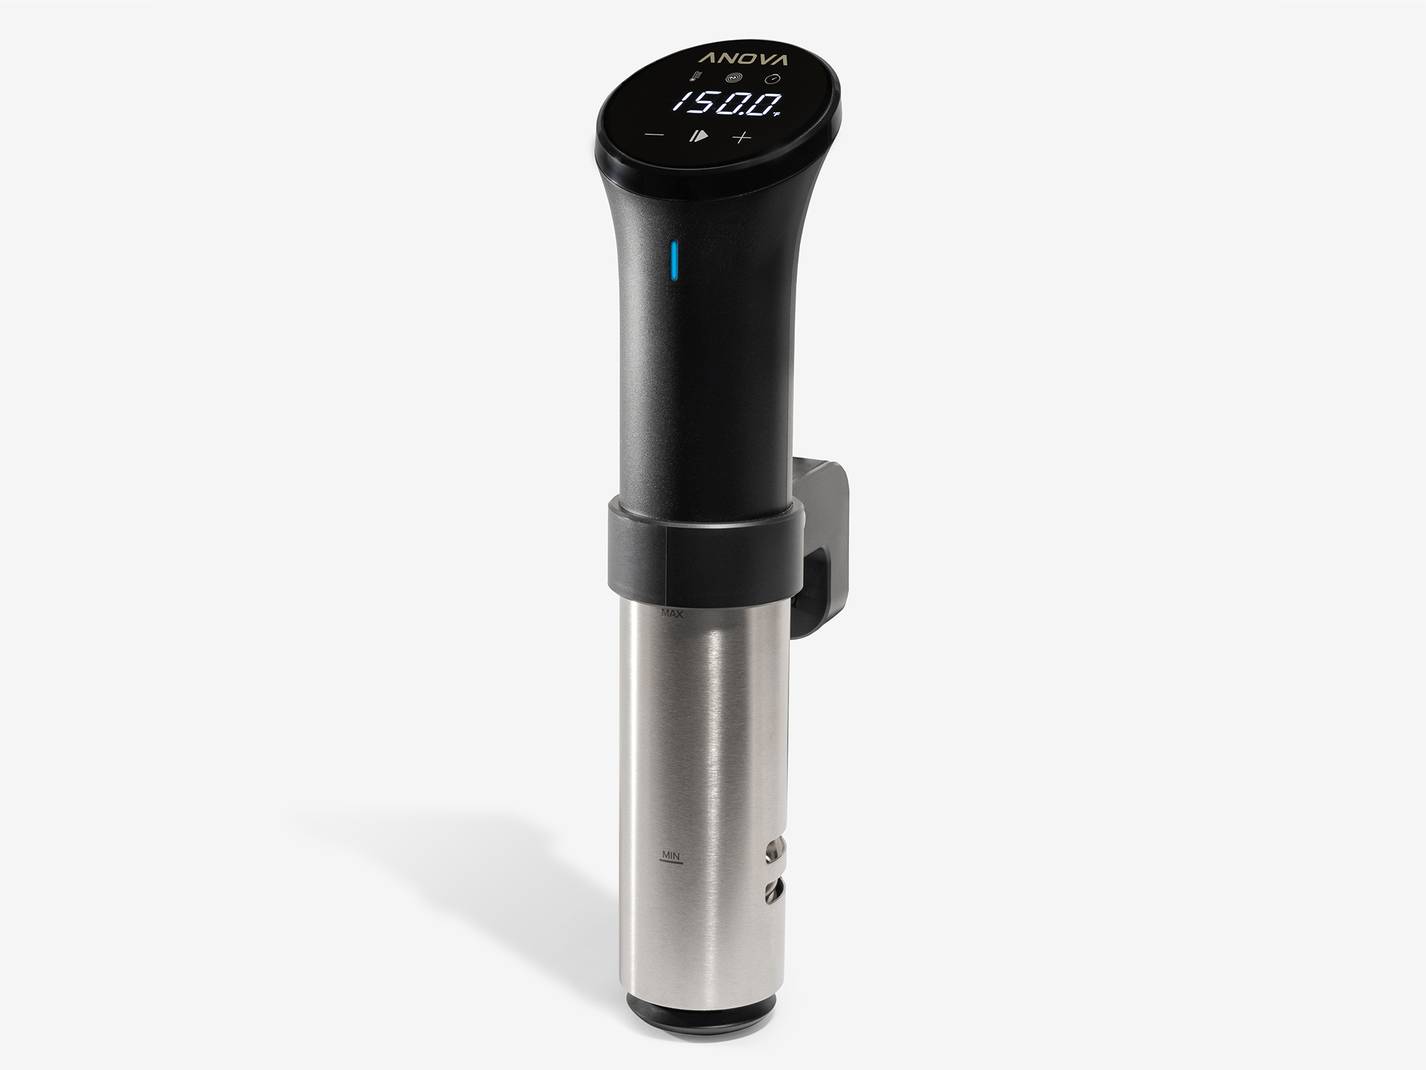 https://www.momjunction.com/wp-content/uploads/product-images/anova-culinary-sous-vide-precision-cooker_afl856.jpg